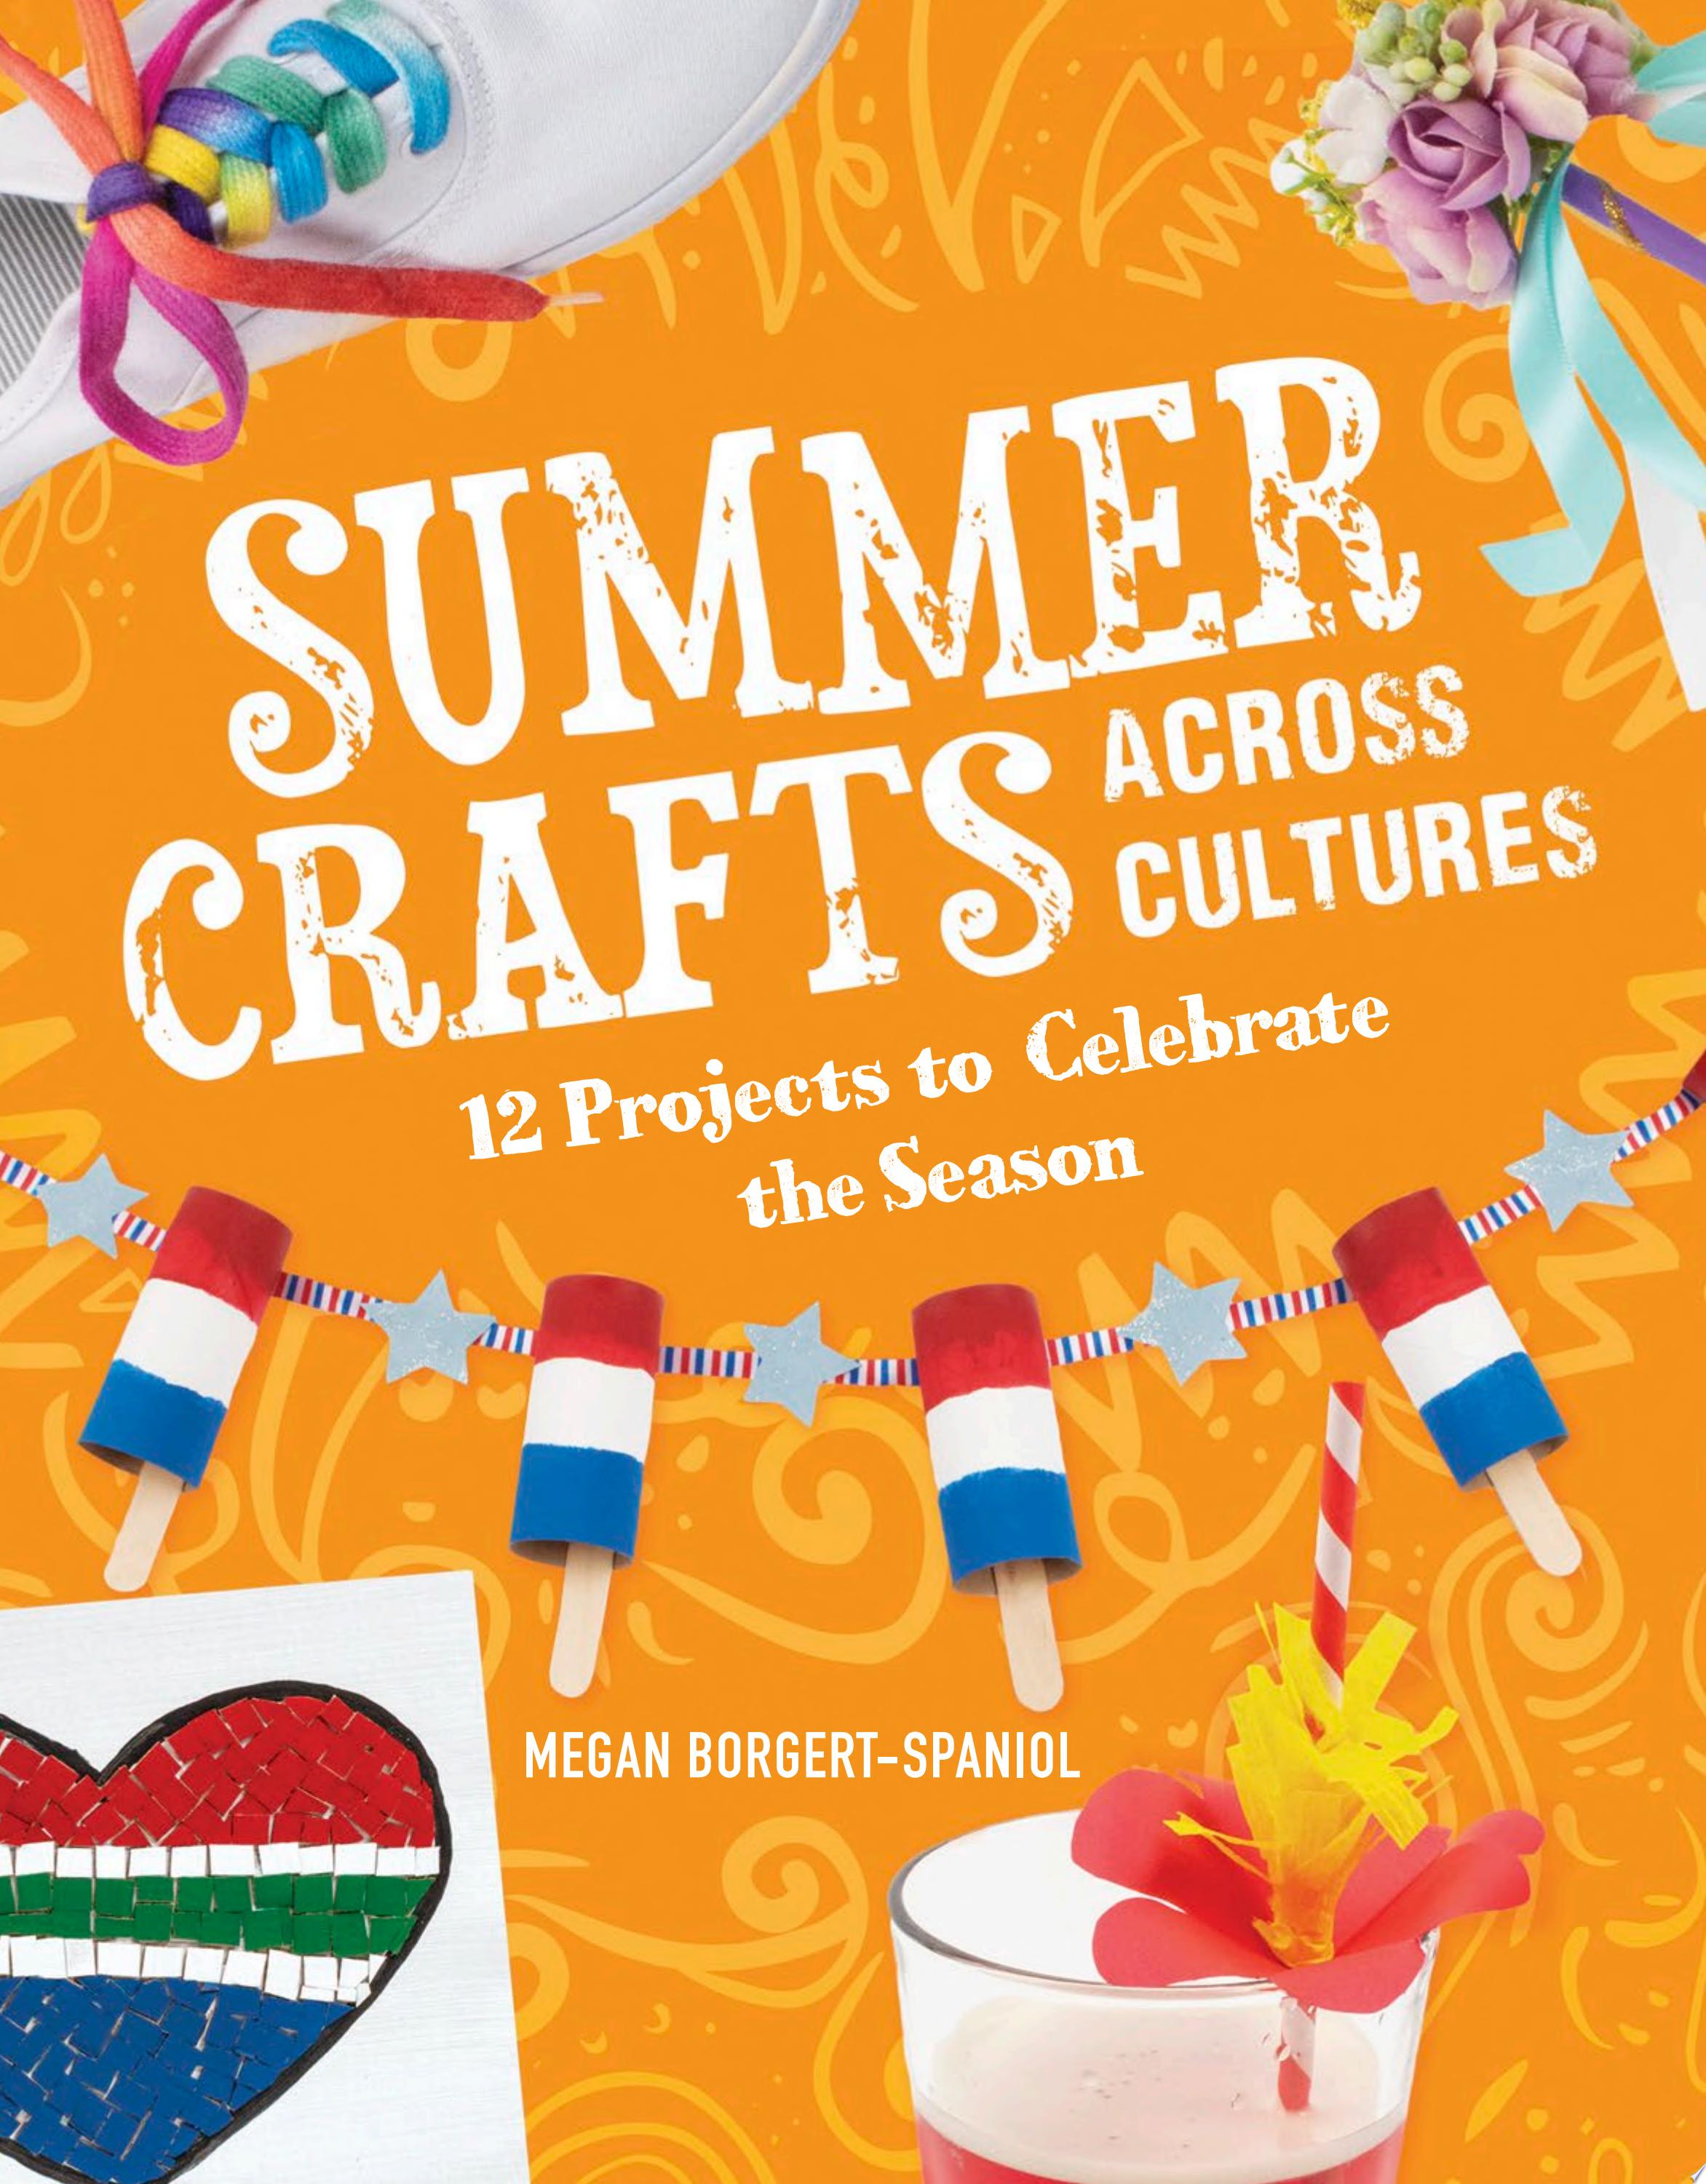 Image for "Summer Crafts Across Cultures"